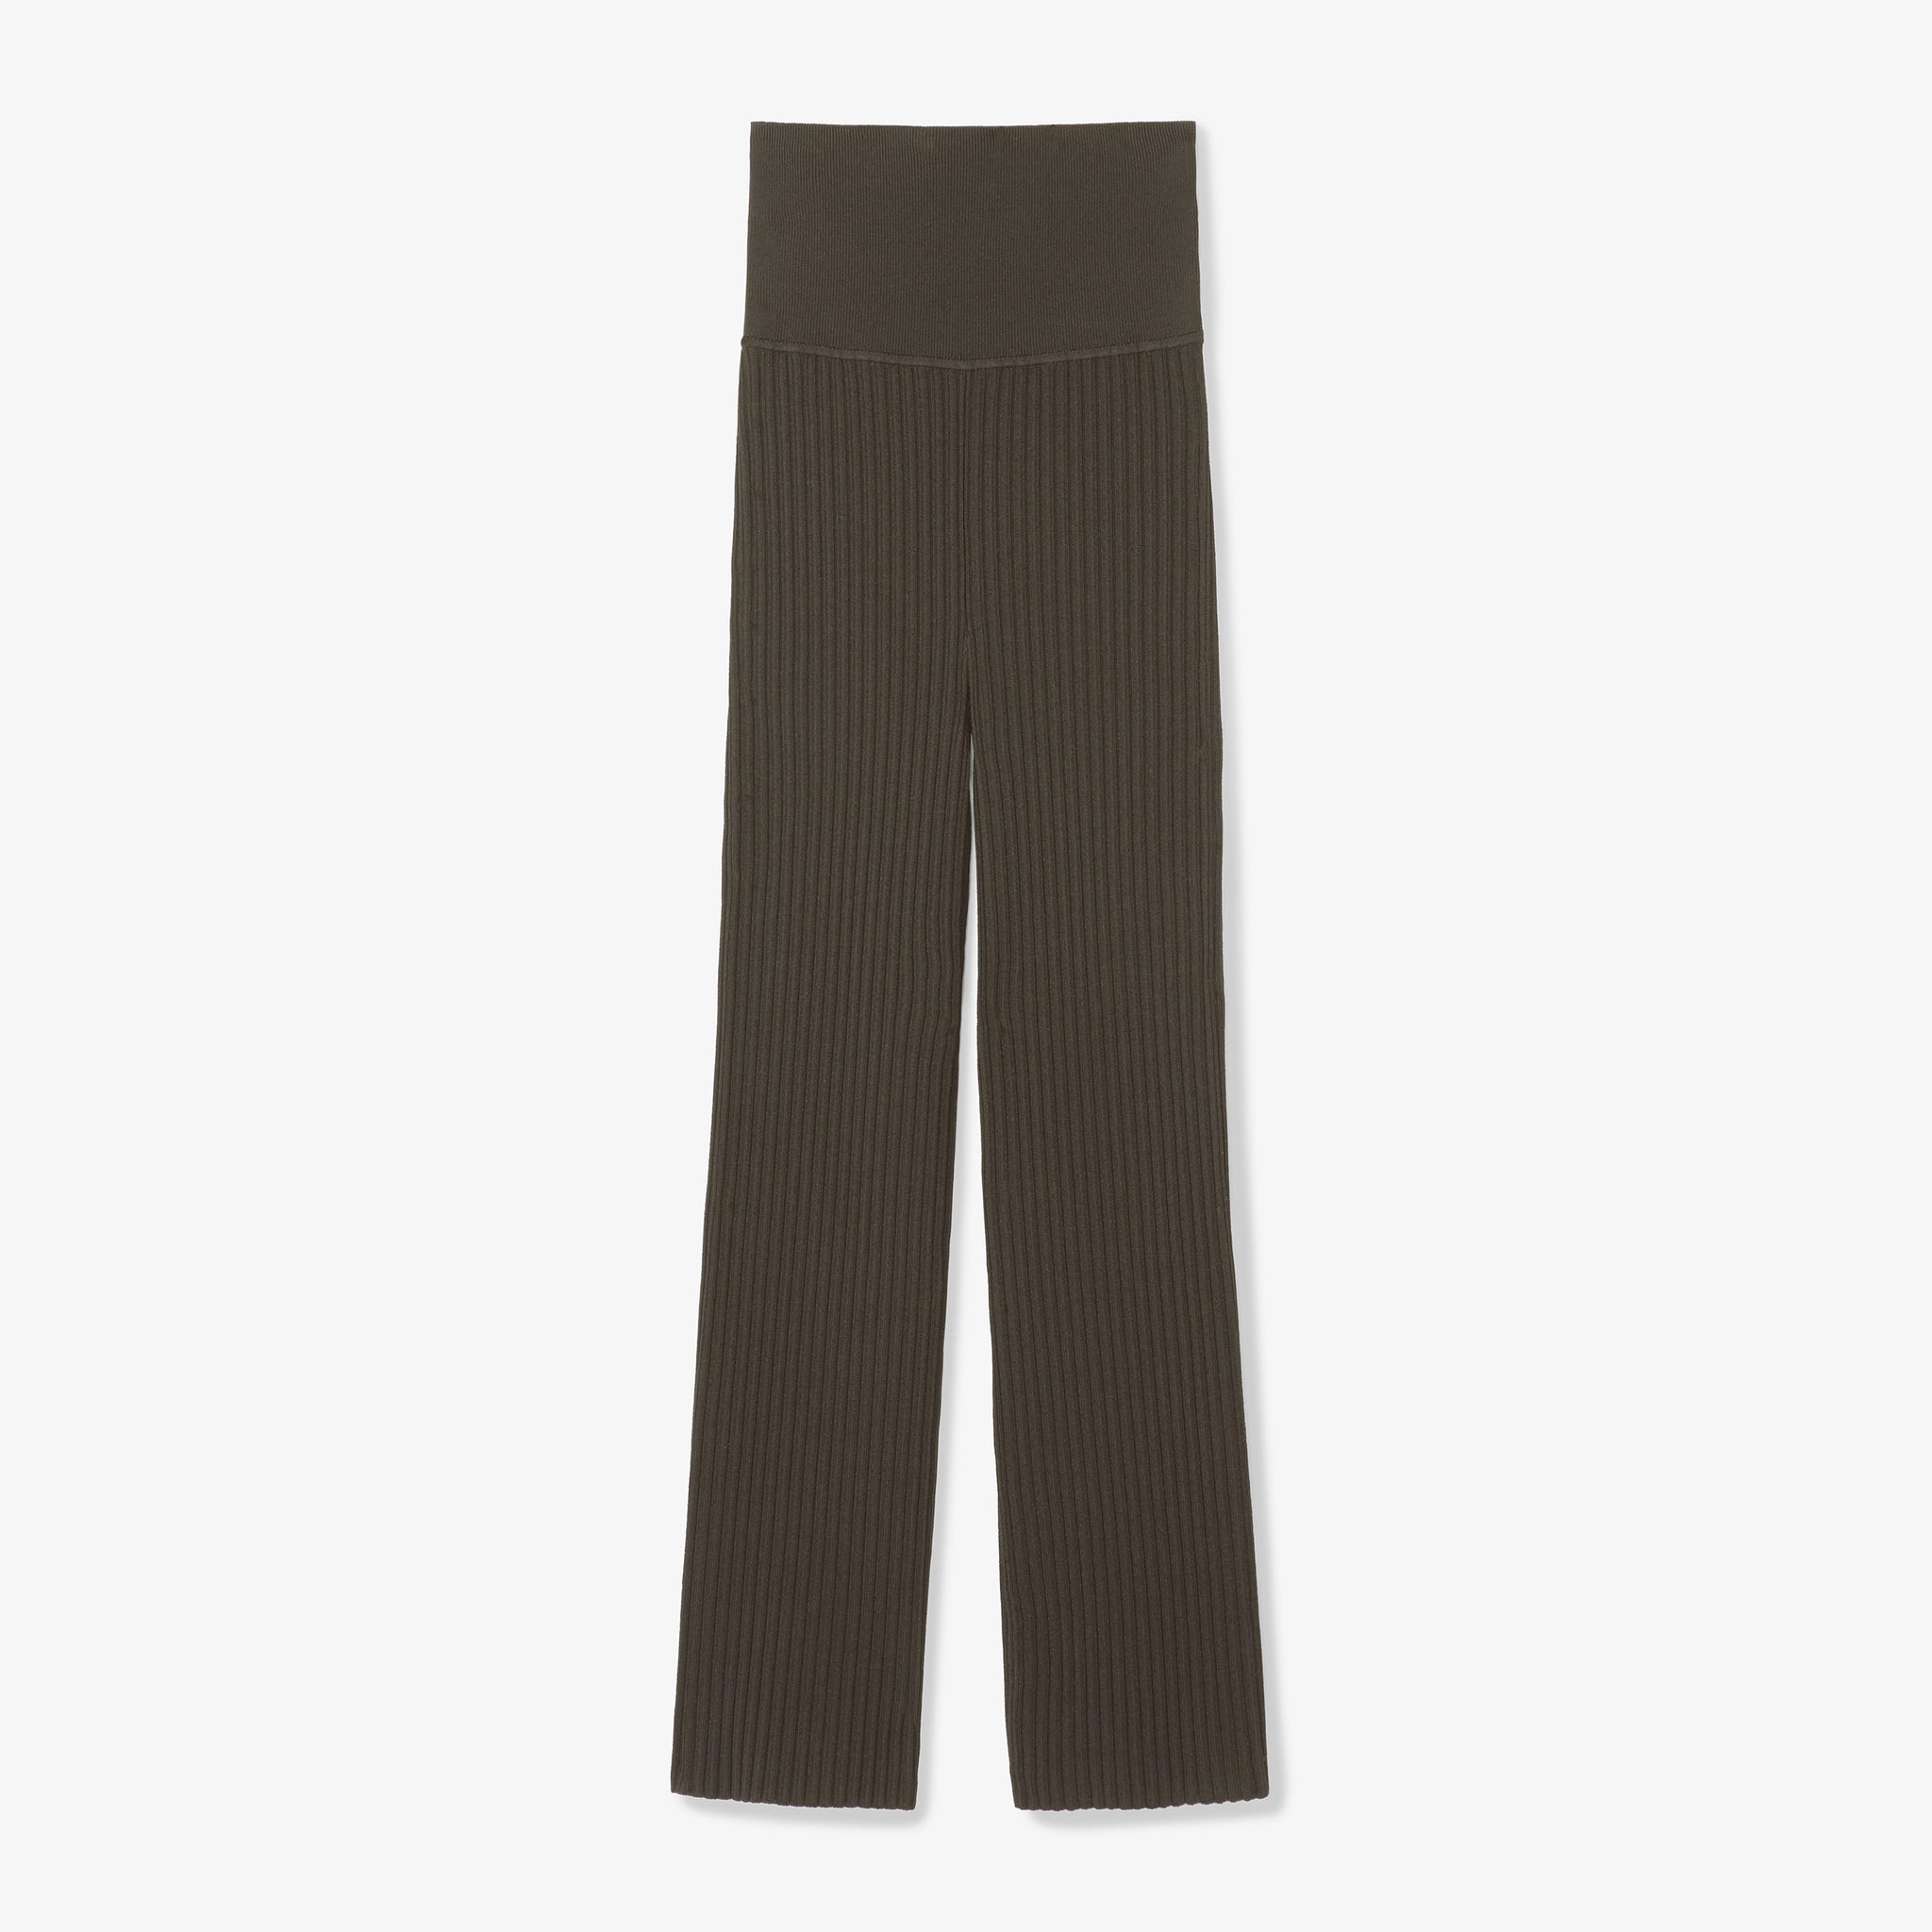 Packshot image of the Finley Stretch Pant - Ribbed Jardigan Knit in Ash